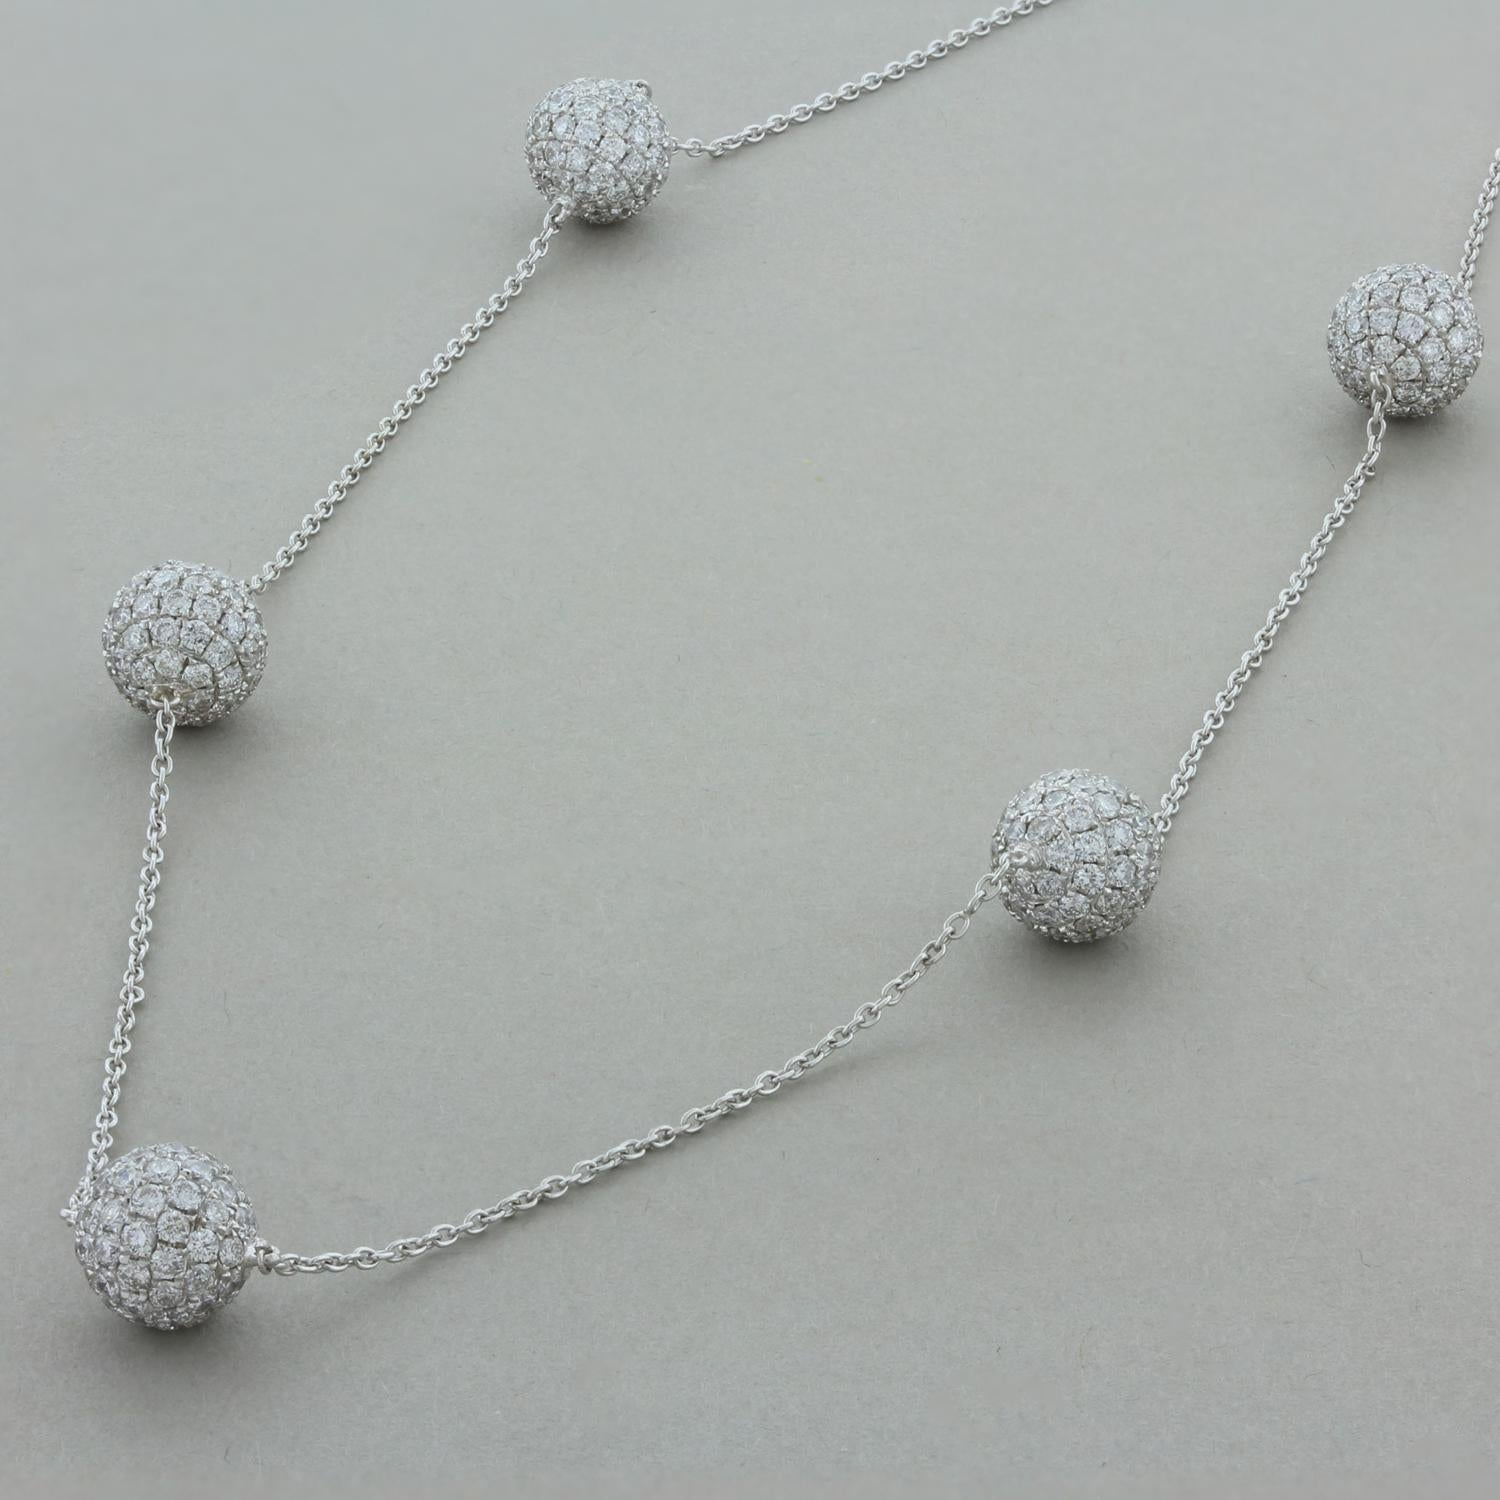 This lively necklace encompasses five spheres that are pave set with 5.63 carats of diamonds. The round brilliant but diamonds are all VS quality and set in 14K white gold. A simple yet elegant necklace that can be worn with many outfits.

Necklace